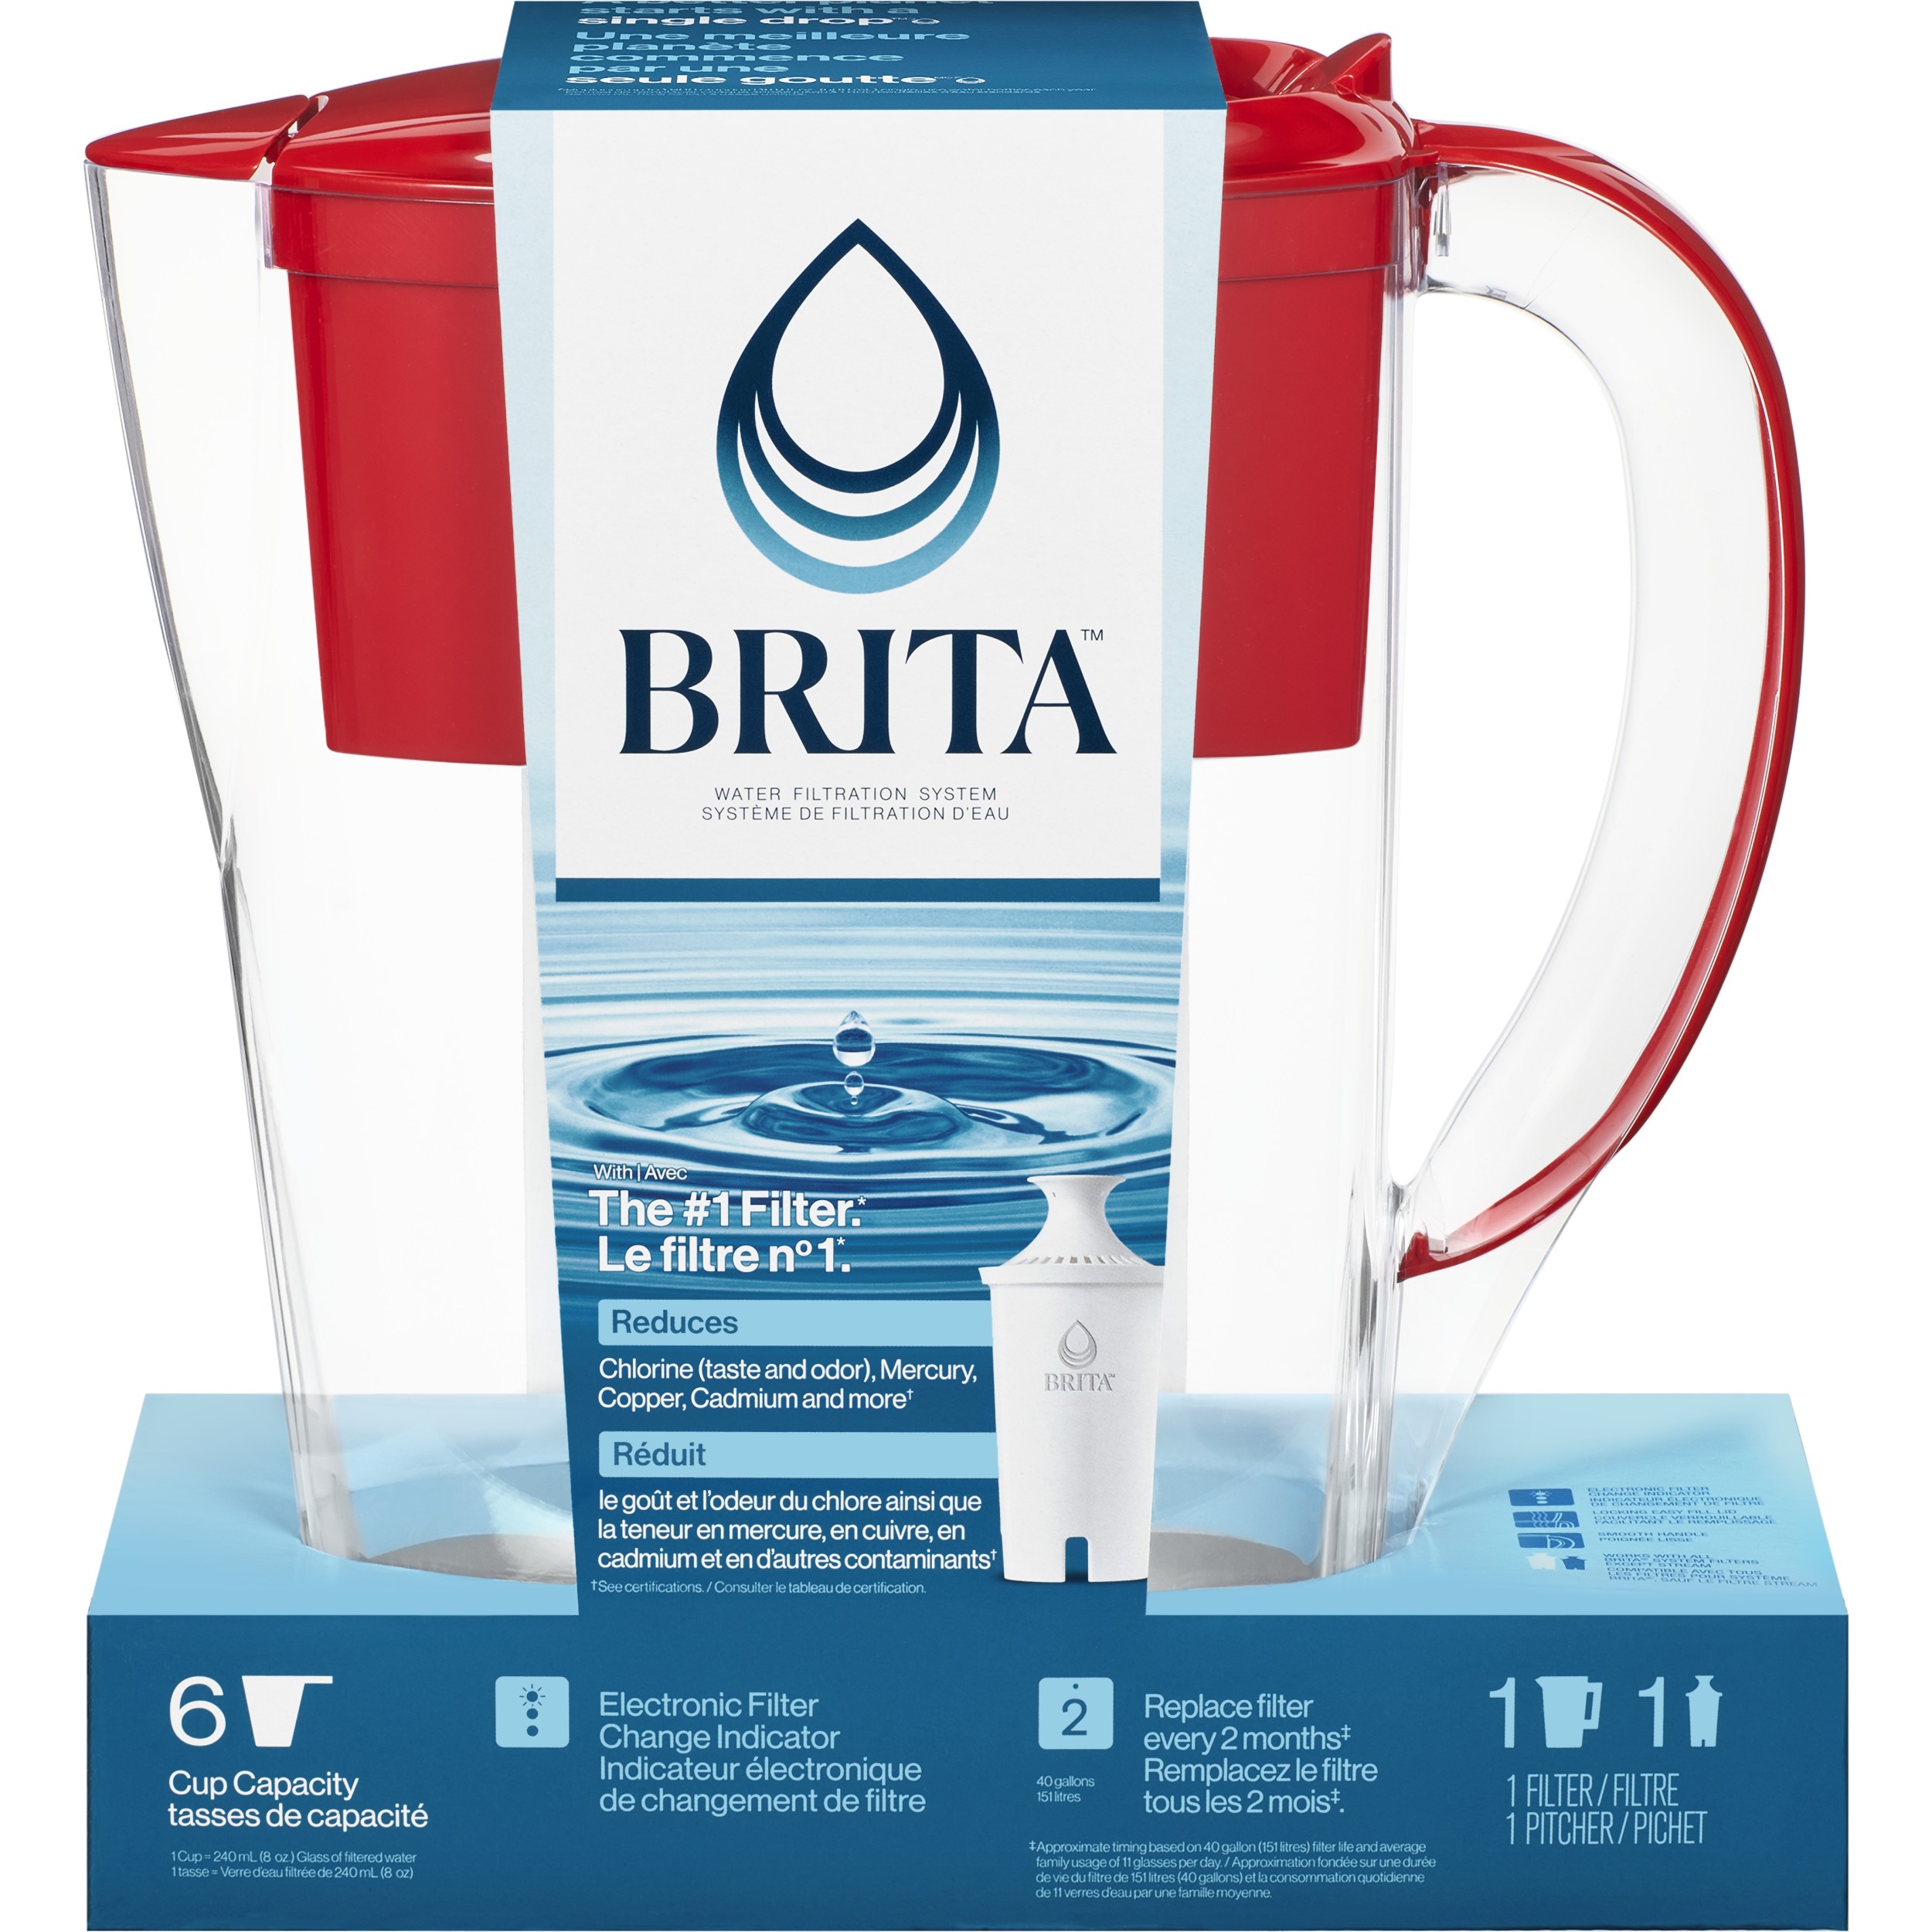 Brita Space Saver Water Filter Pitcher, 6 Cup - Red - image 3 of 10